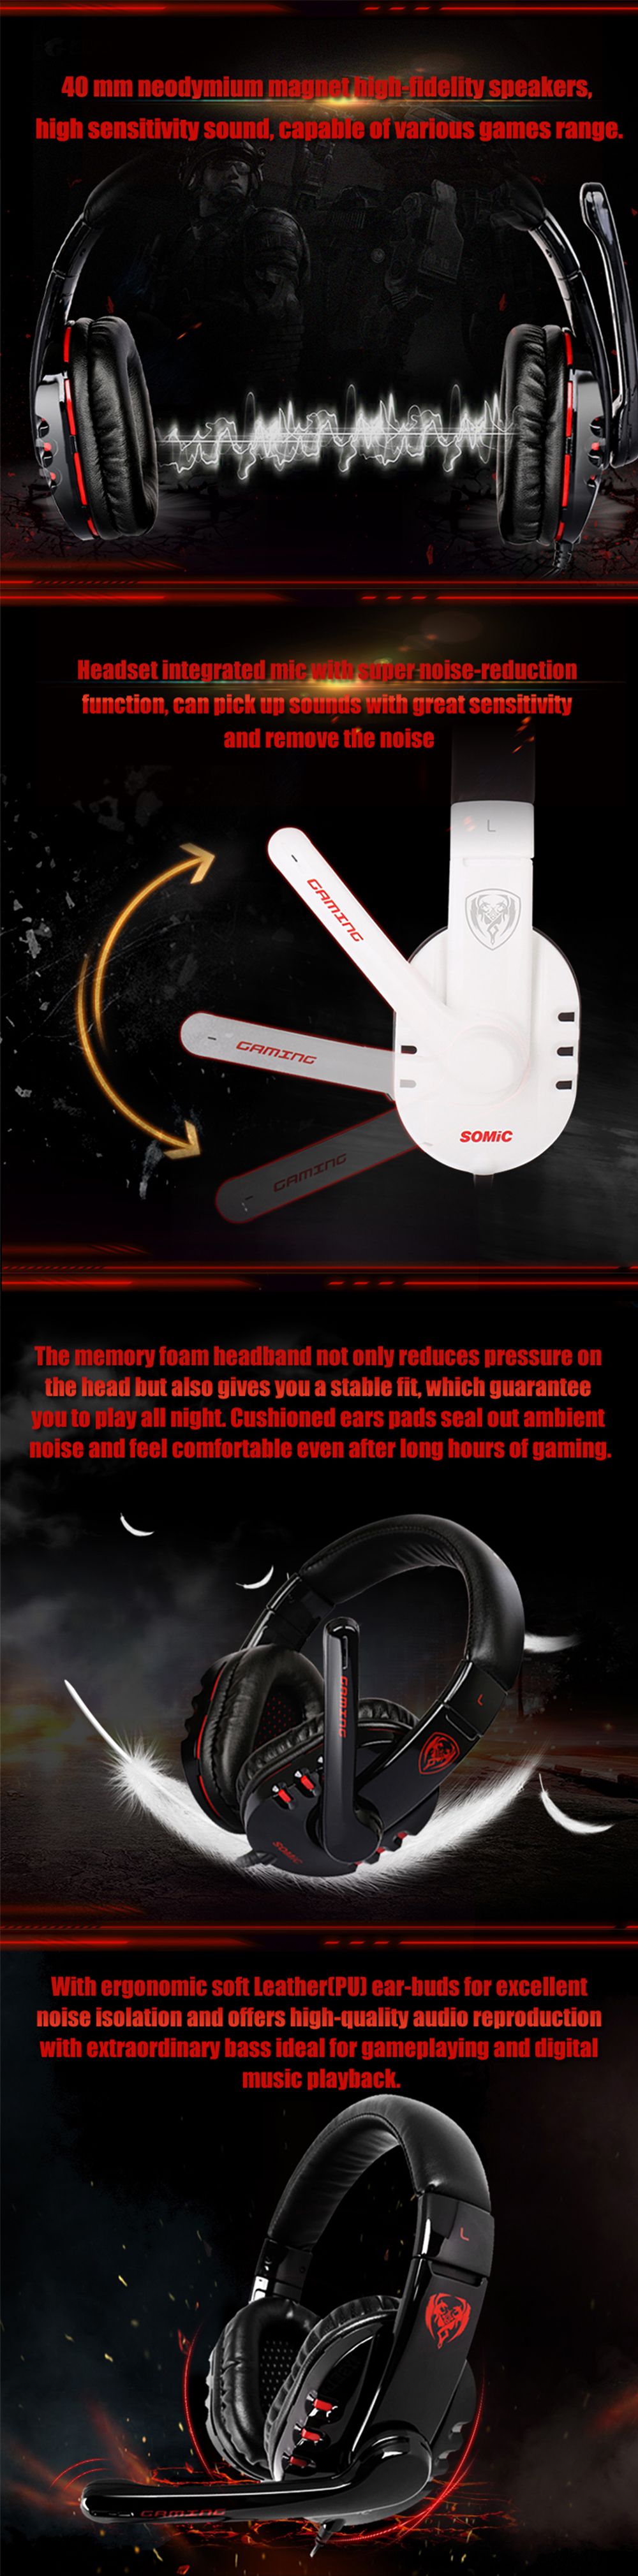 SOMiC-G927-Virtual-71-Surround-USB-Gaming-Headphone-29-Meters-Long-Wire-Headset-With-Microphone-for--1560695